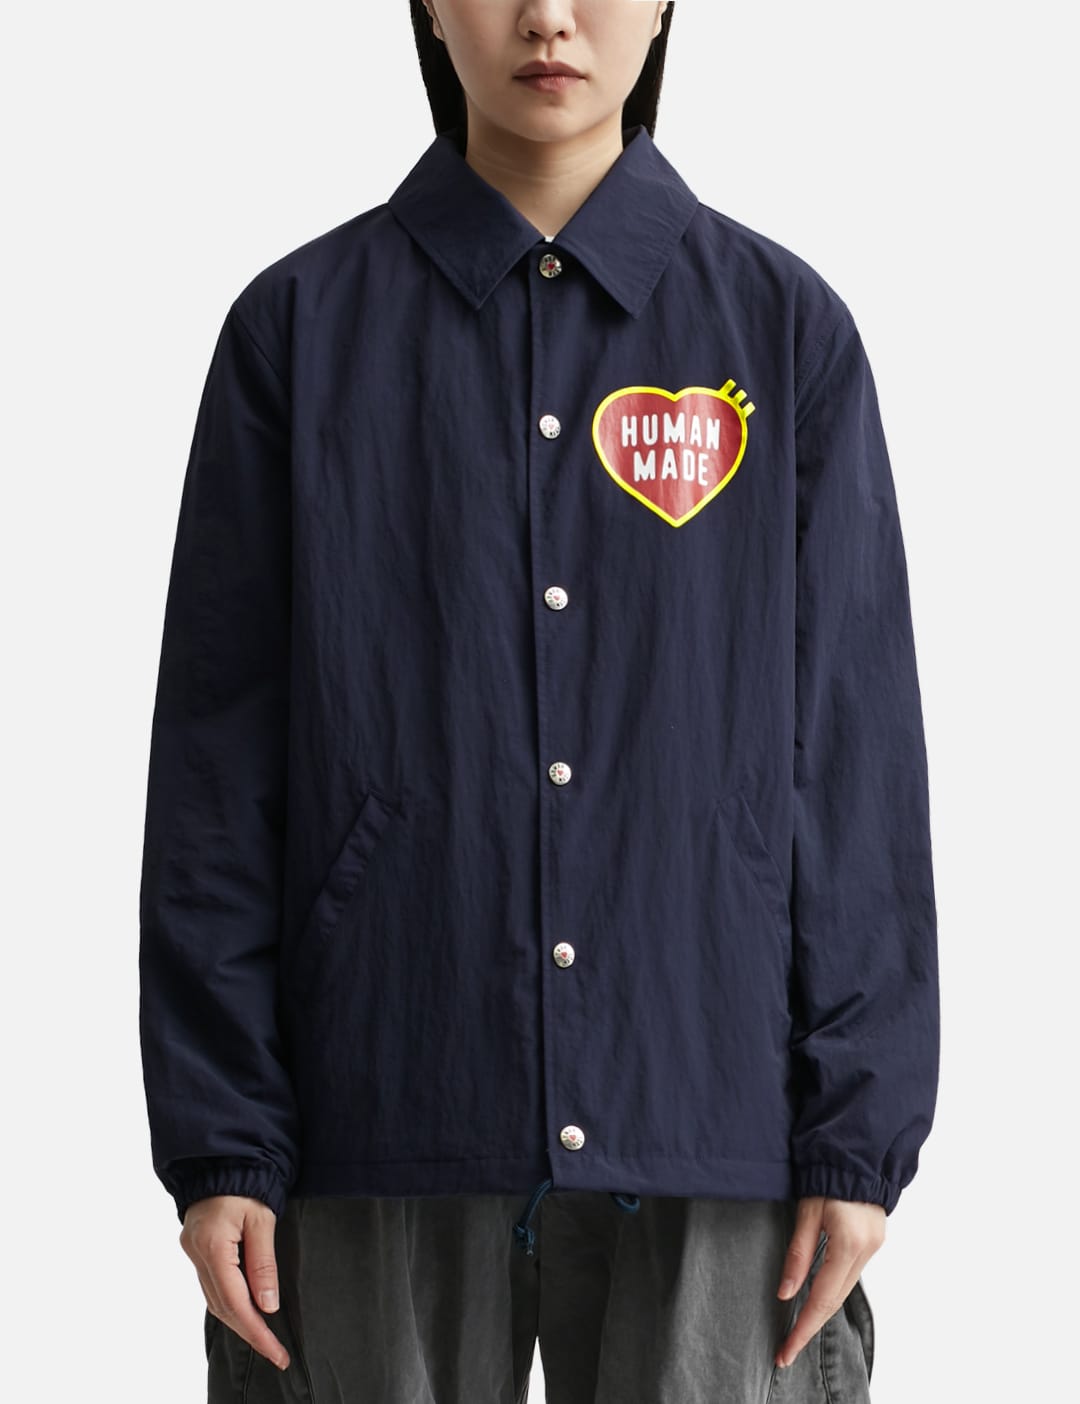 Human Made Coach Jacket In Blue | ModeSens